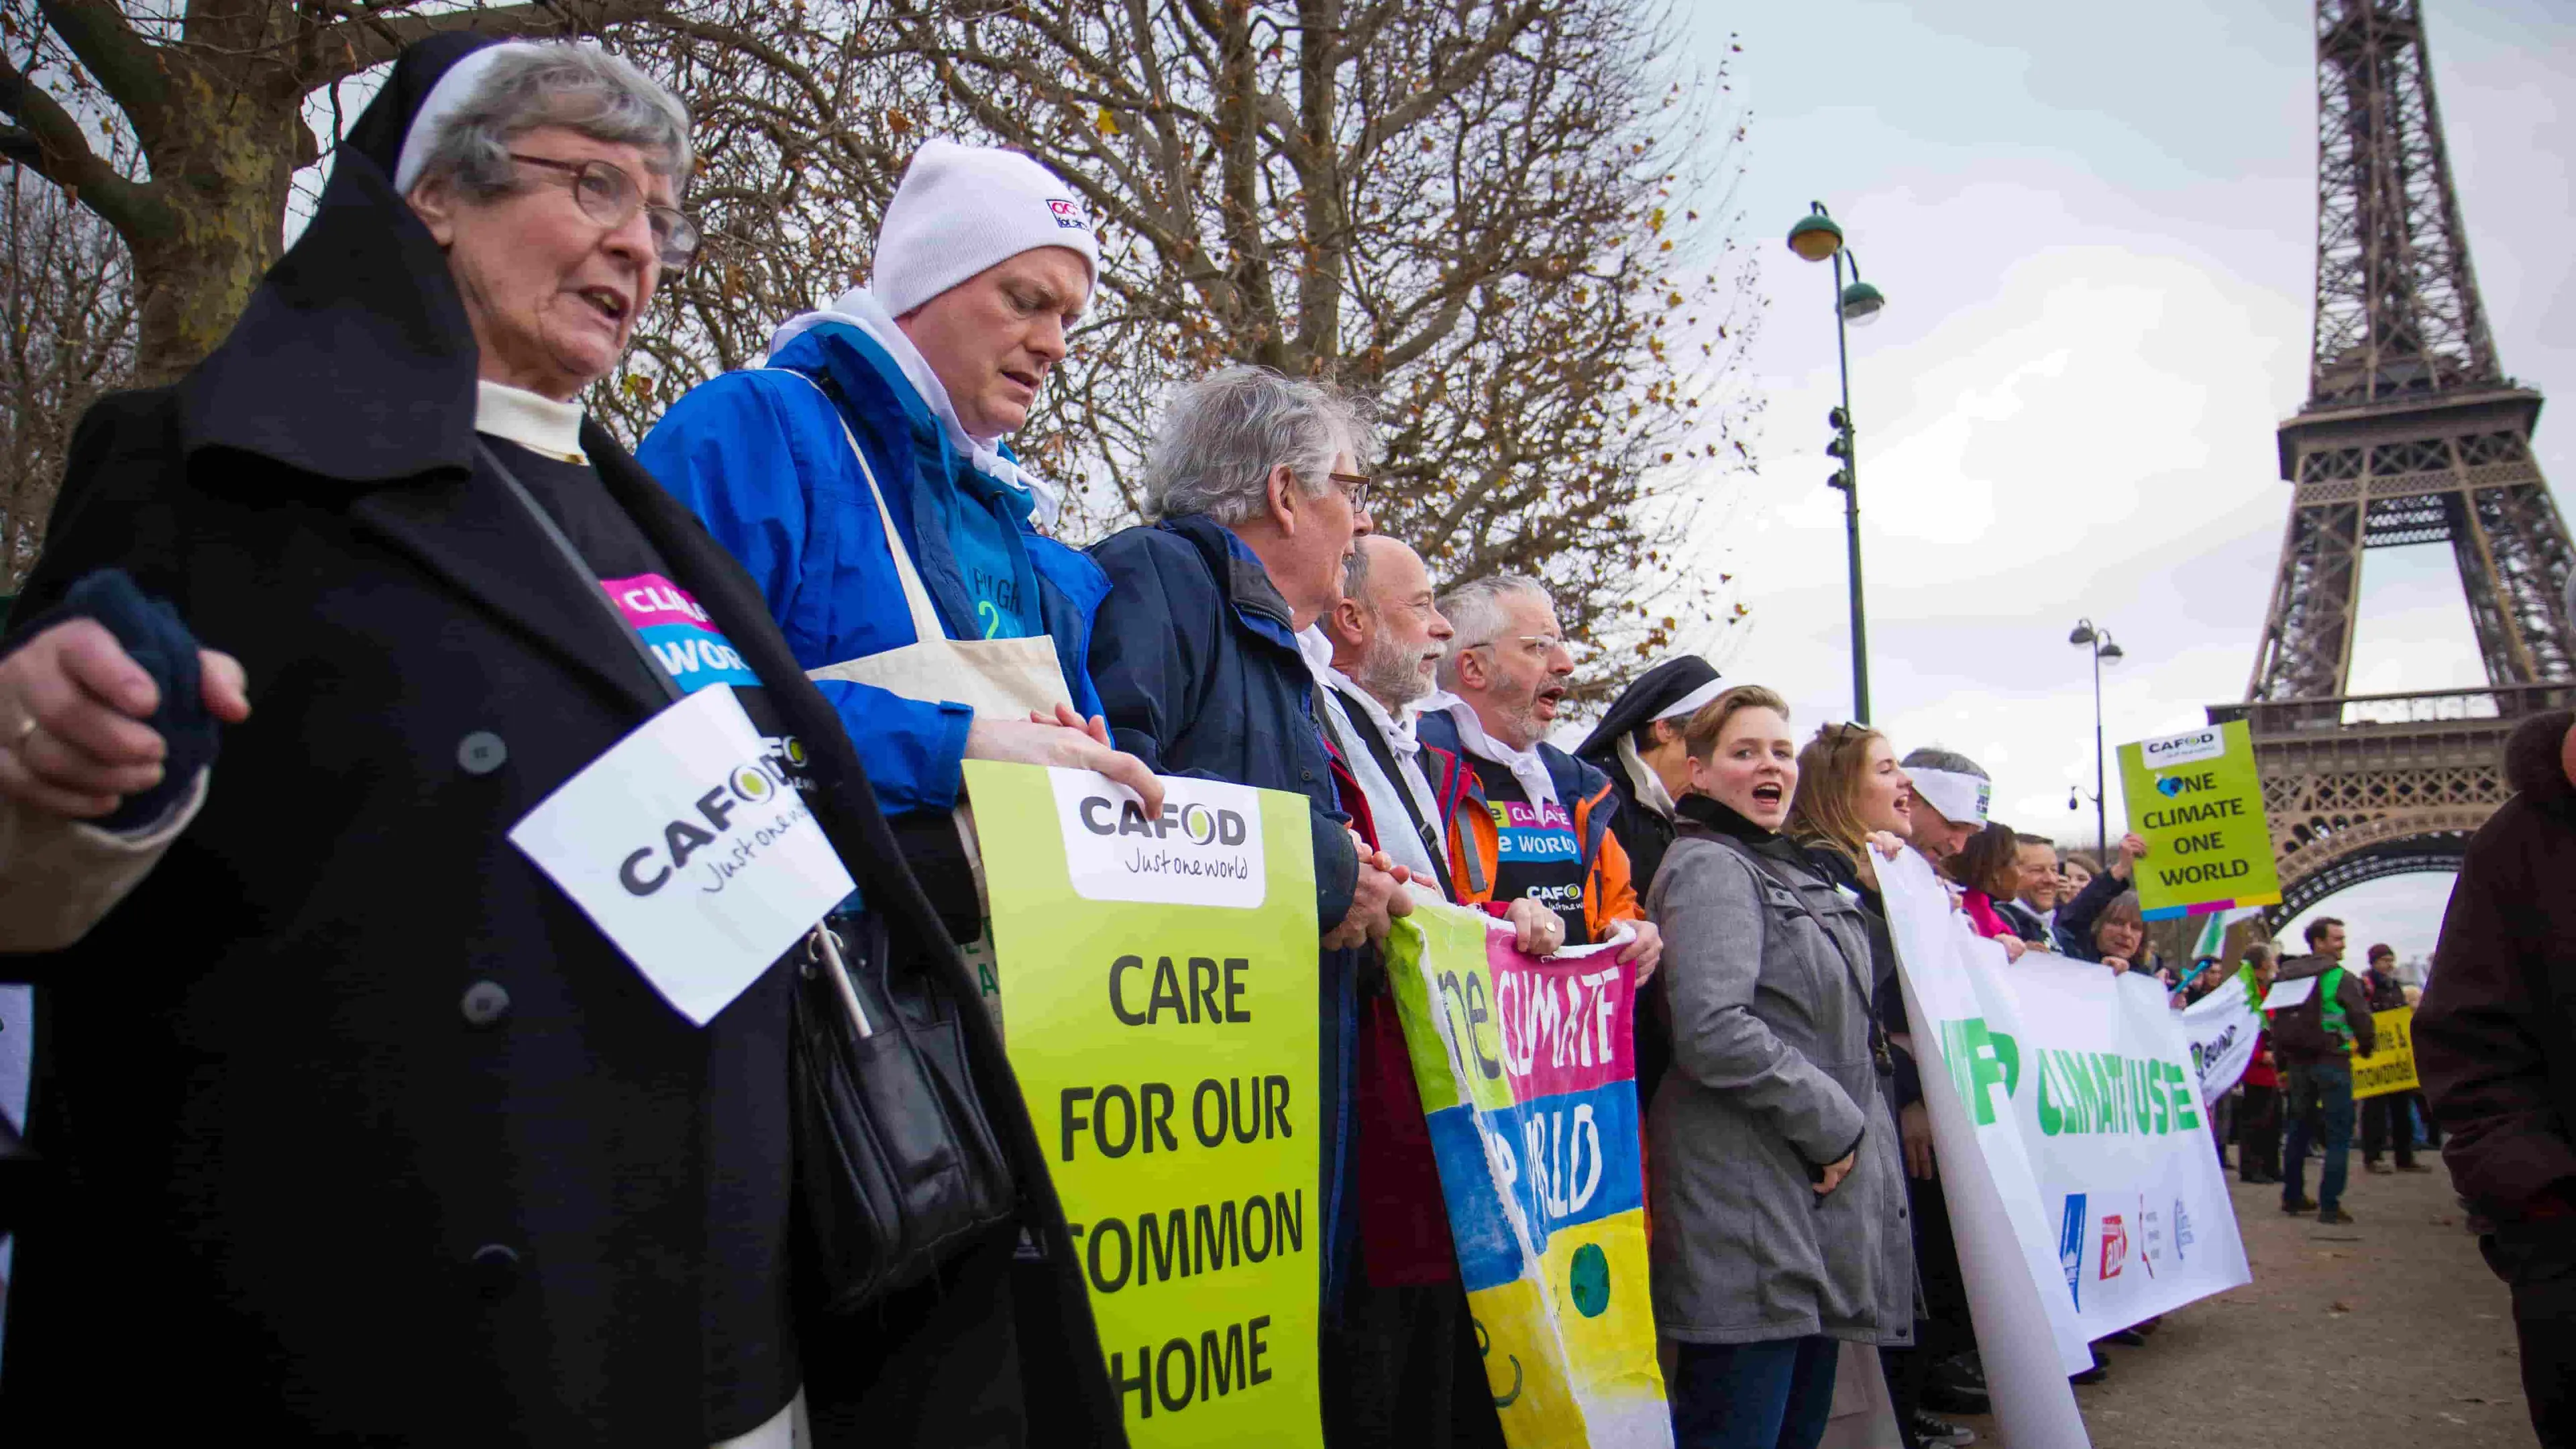 Europe - France - CAFOD supporters protesting in Paris for COP21